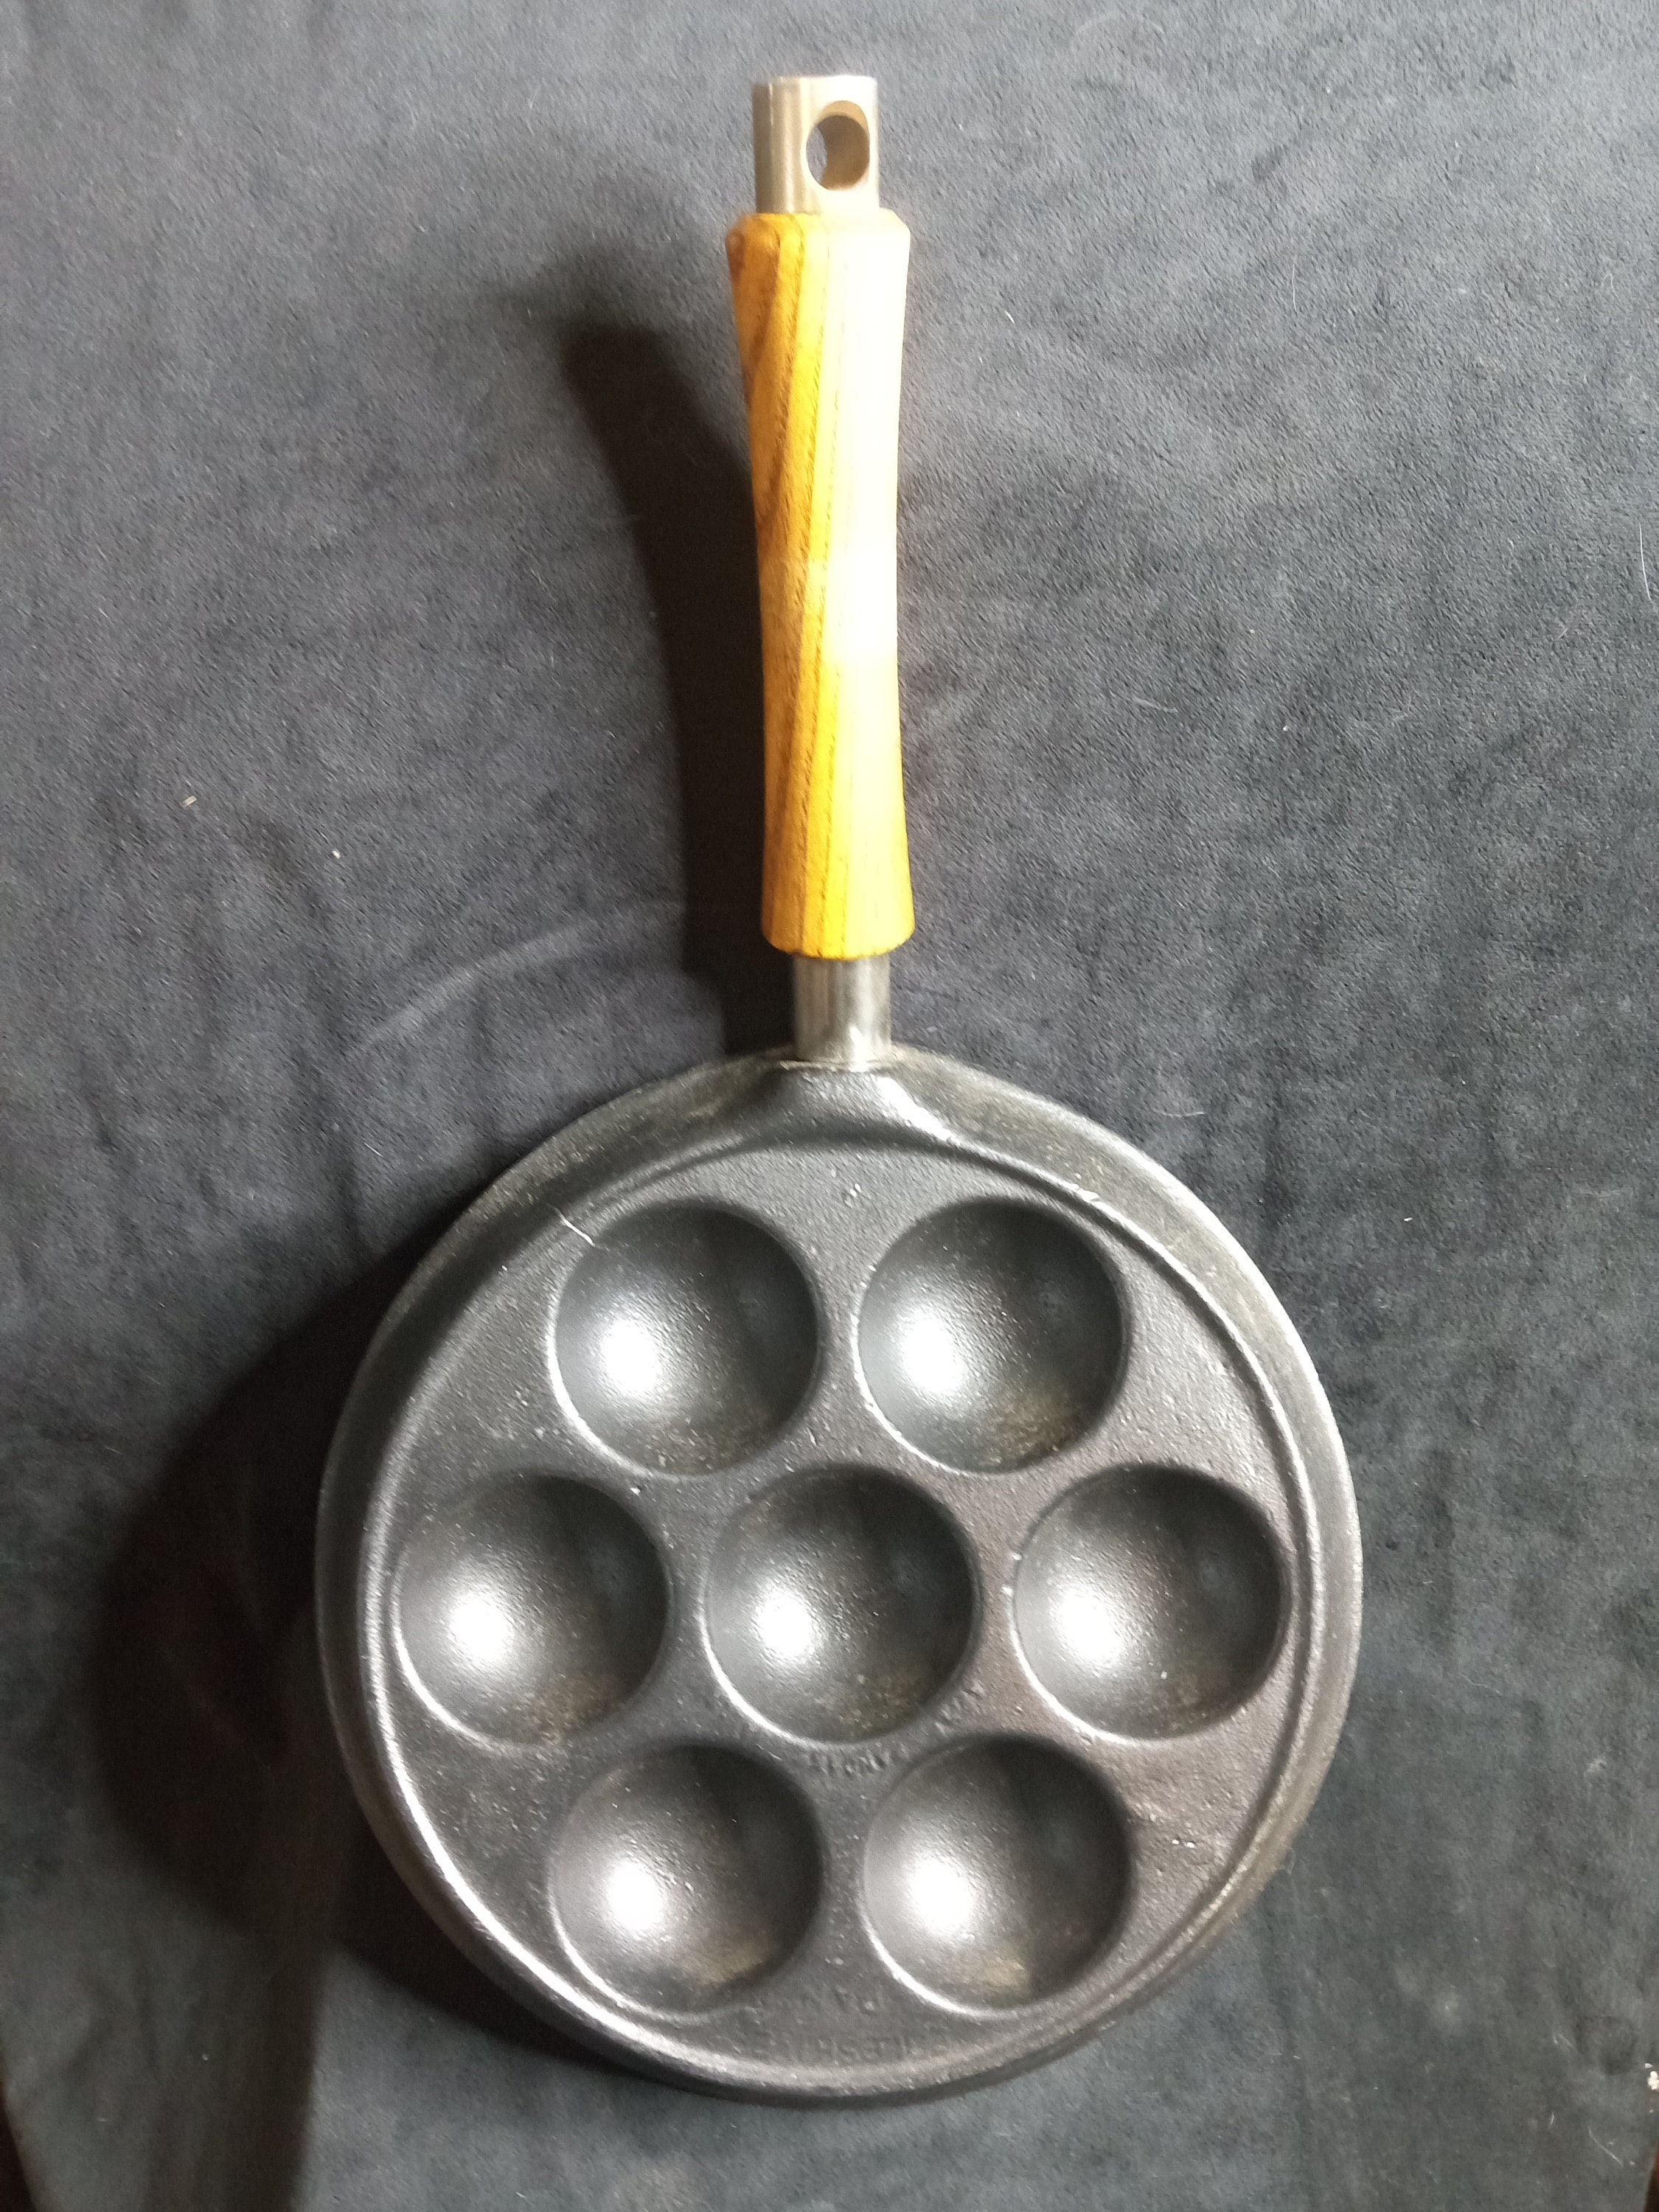 Aebleskiver Cast Iron Danish Pancake Ball Pan With Wooden 